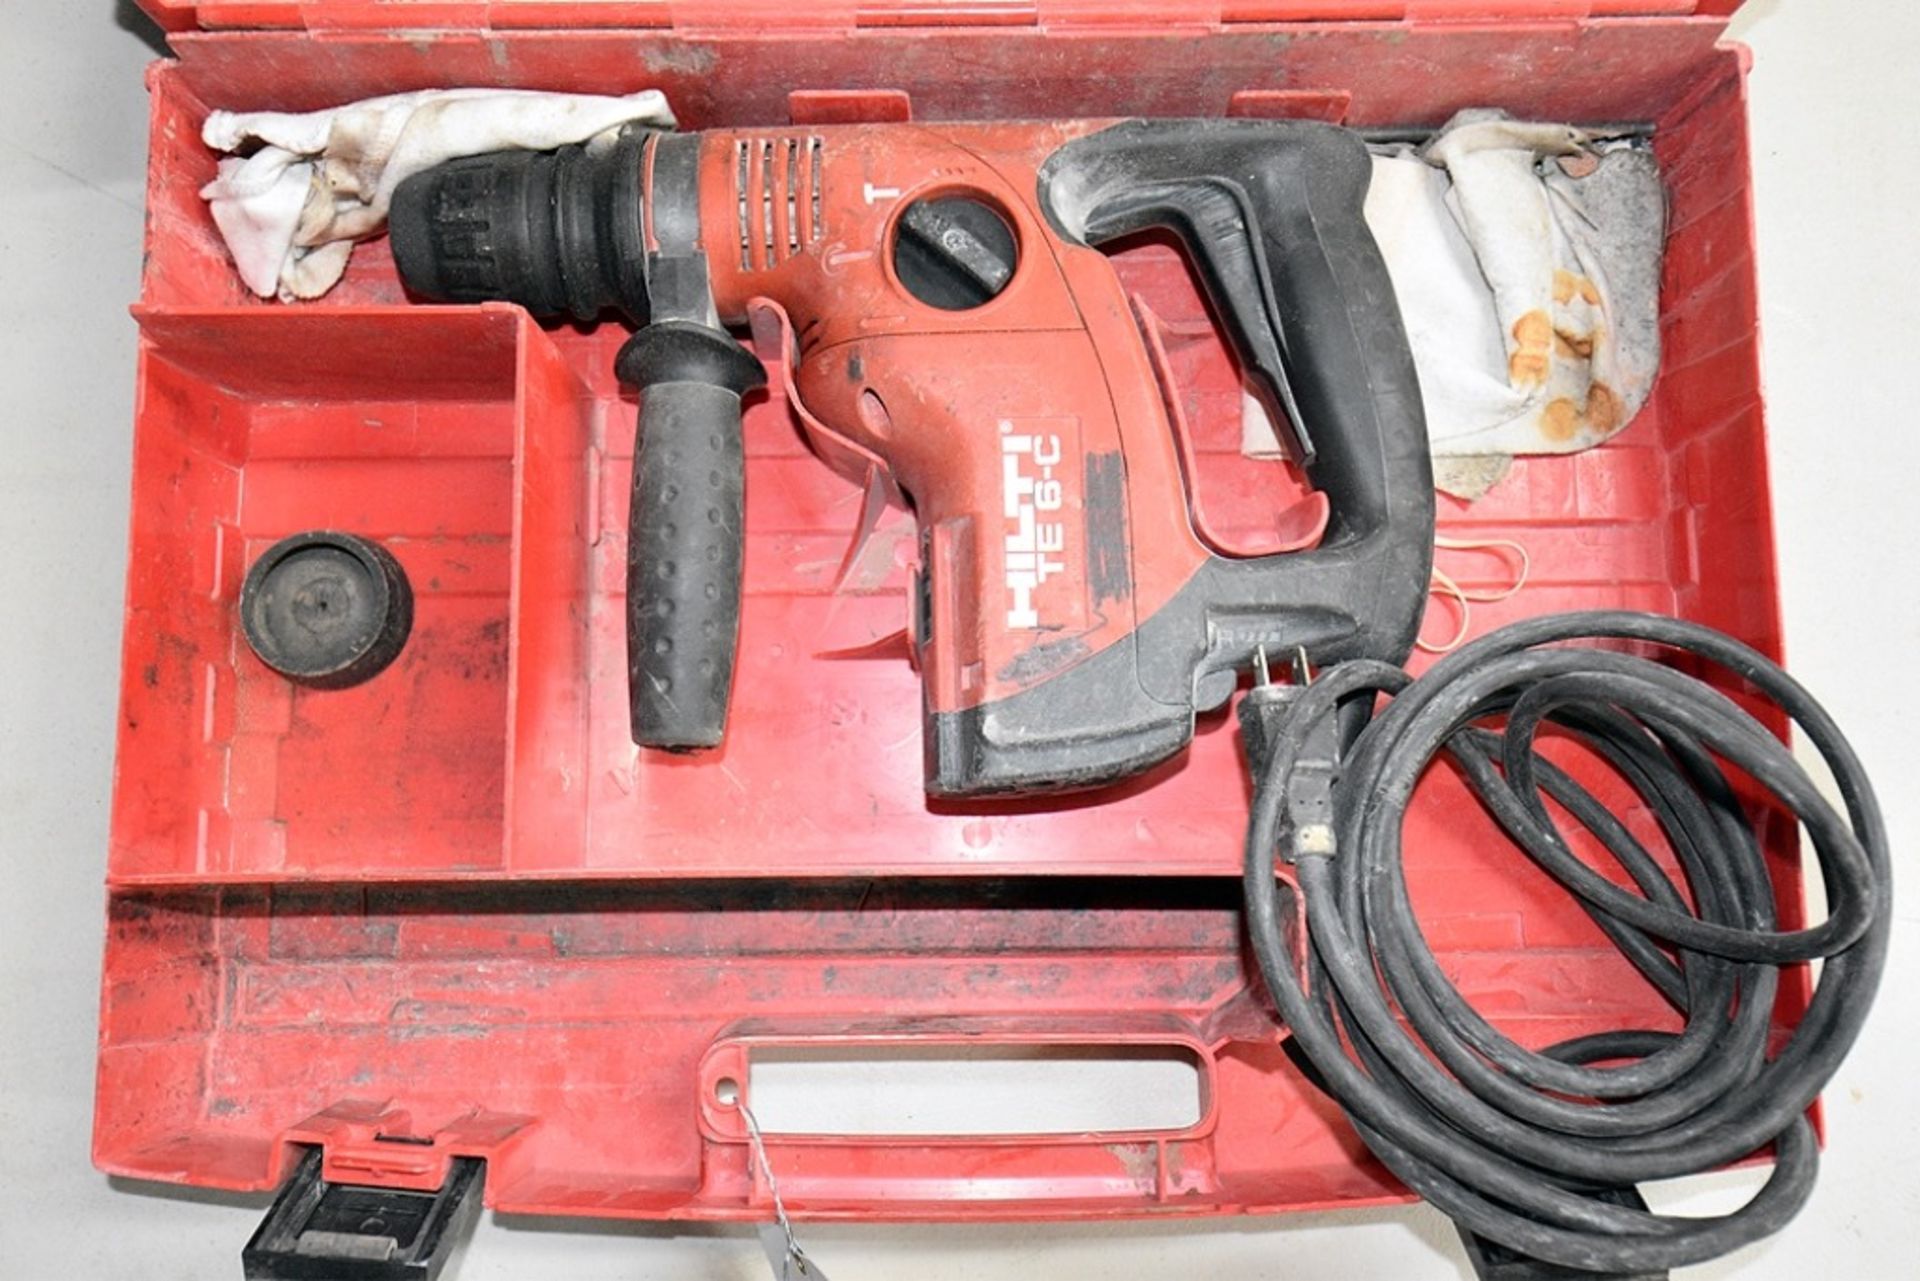 Hilti TE 6-C DRS Corded Rotary Hammer w/ Case - Image 2 of 3